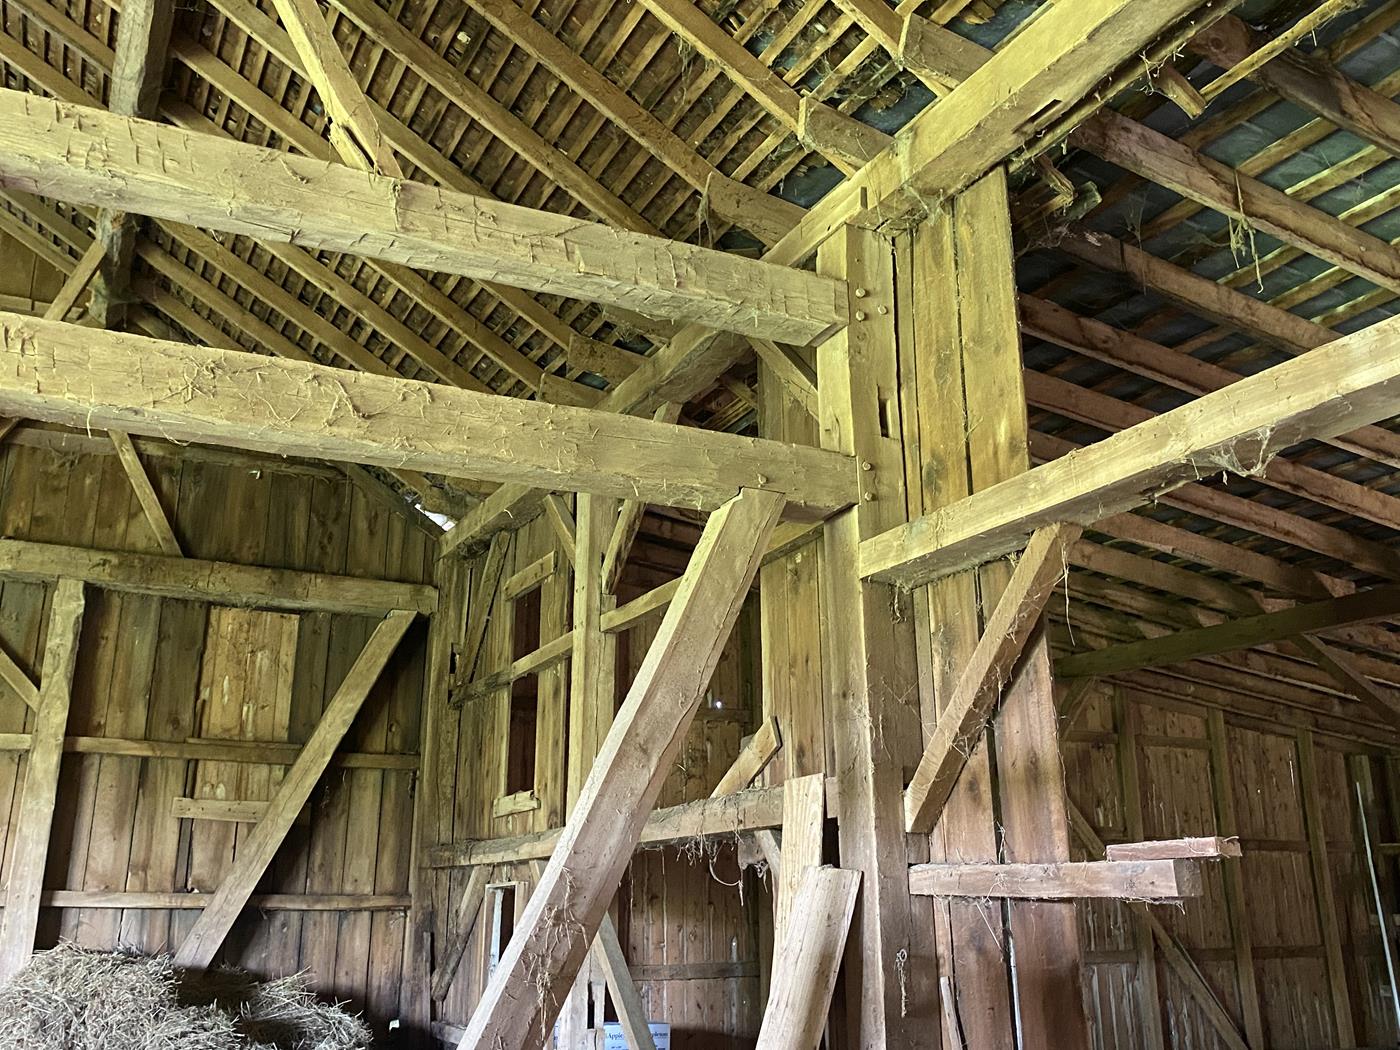 https://www.ohiovalleybarnsalvage.com/images/Marlatt Historic Ohio Barn Frame For Sale - Your Source For Reclaimed Lumber